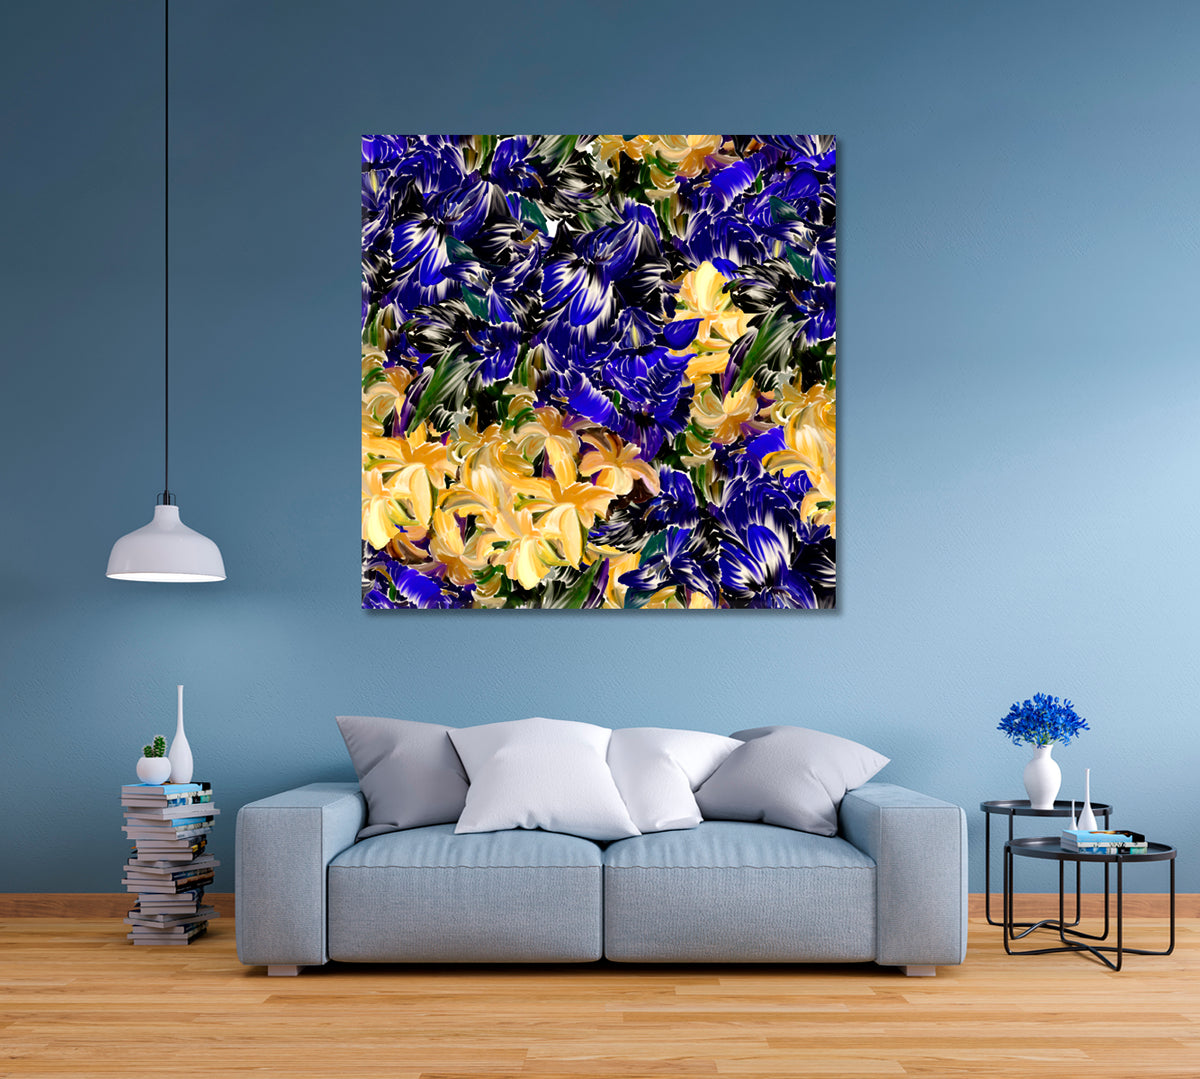 Blue and Yellow Flowers Abstract Painting Floral & Botanical Split Art Artesty 1 Panel 12"x12" 